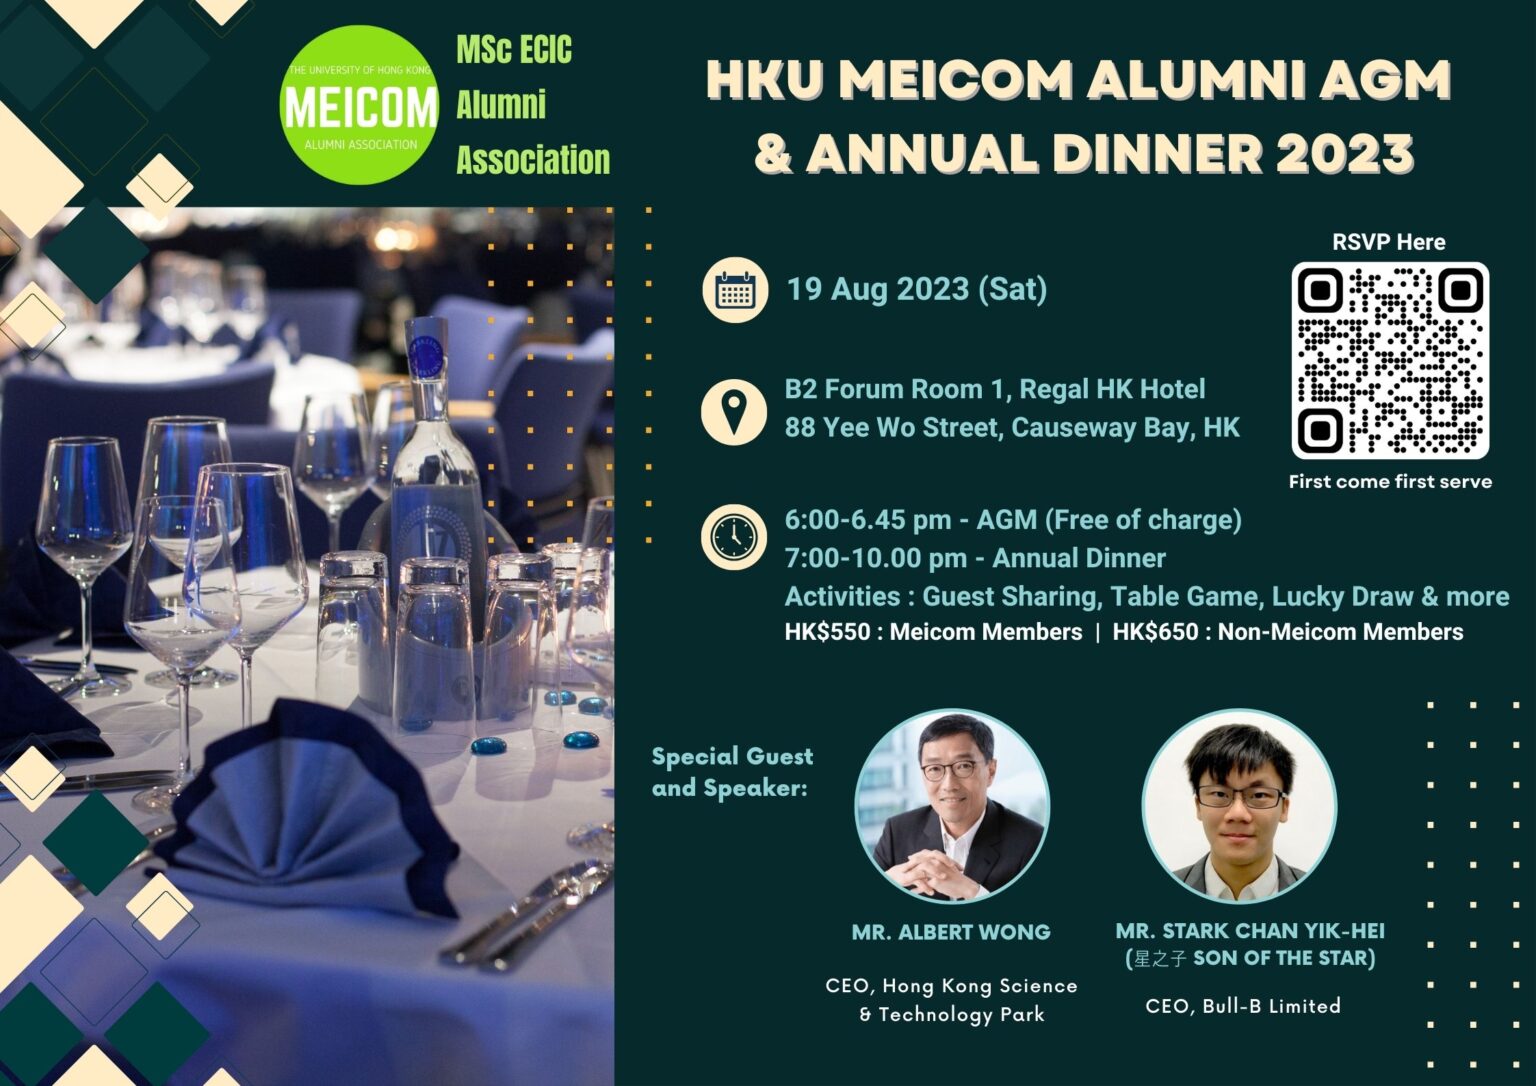 HKU MEICOM AGM and Annual Dinner 2023 on 19 Aug (Sat) 2023